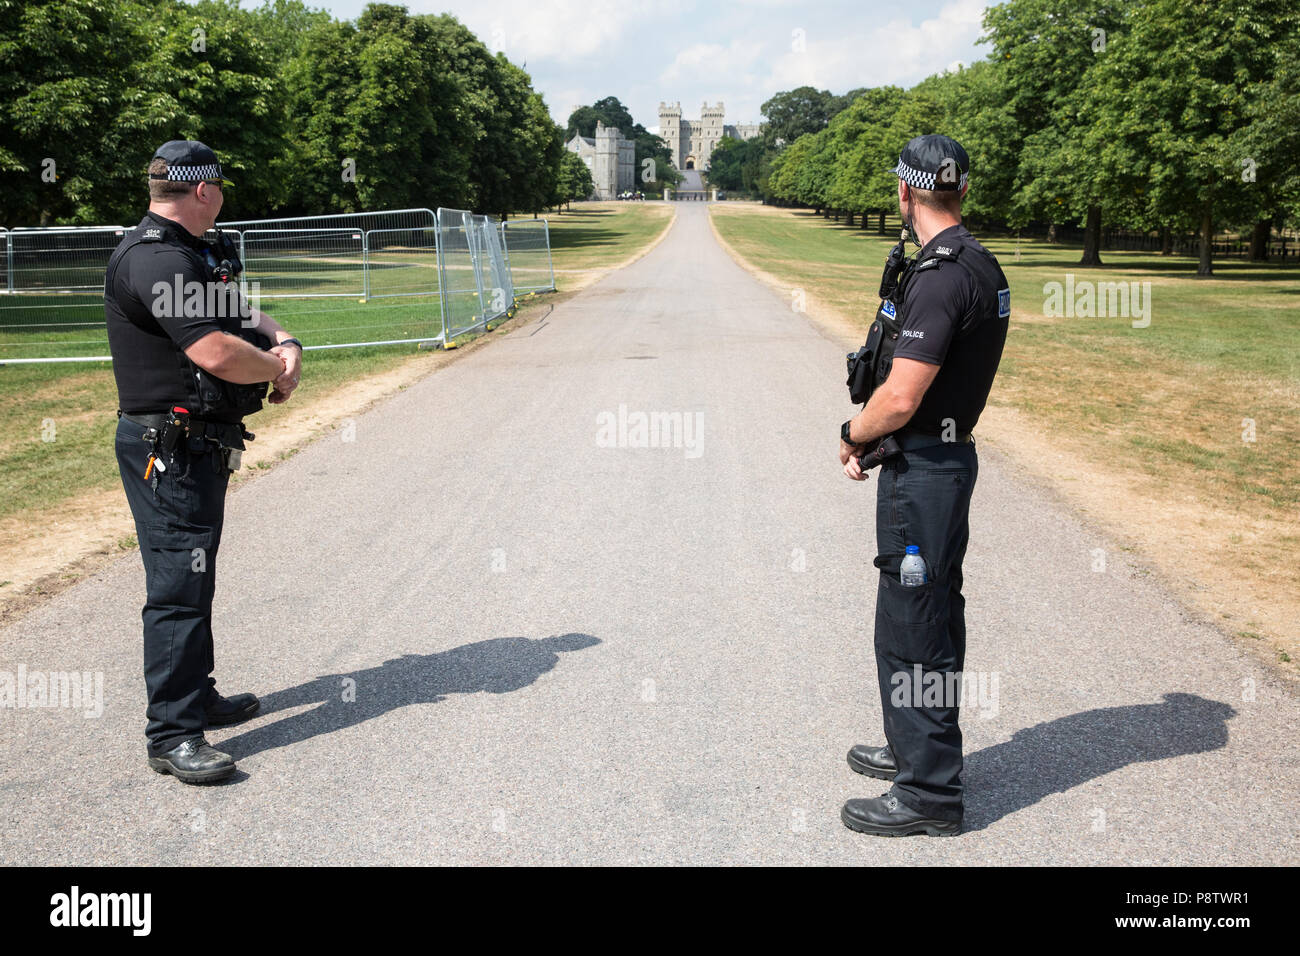 Windsor, UK. 13th July, 2018. Police officers on duty on the Long Walk outside Windsor Castle during the visit of US President Donald Trump to meet the Queen for afternoon tea. A section of the Long Walk was closed to the public. Credit: Mark Kerrison/Alamy Live News Stock Photo